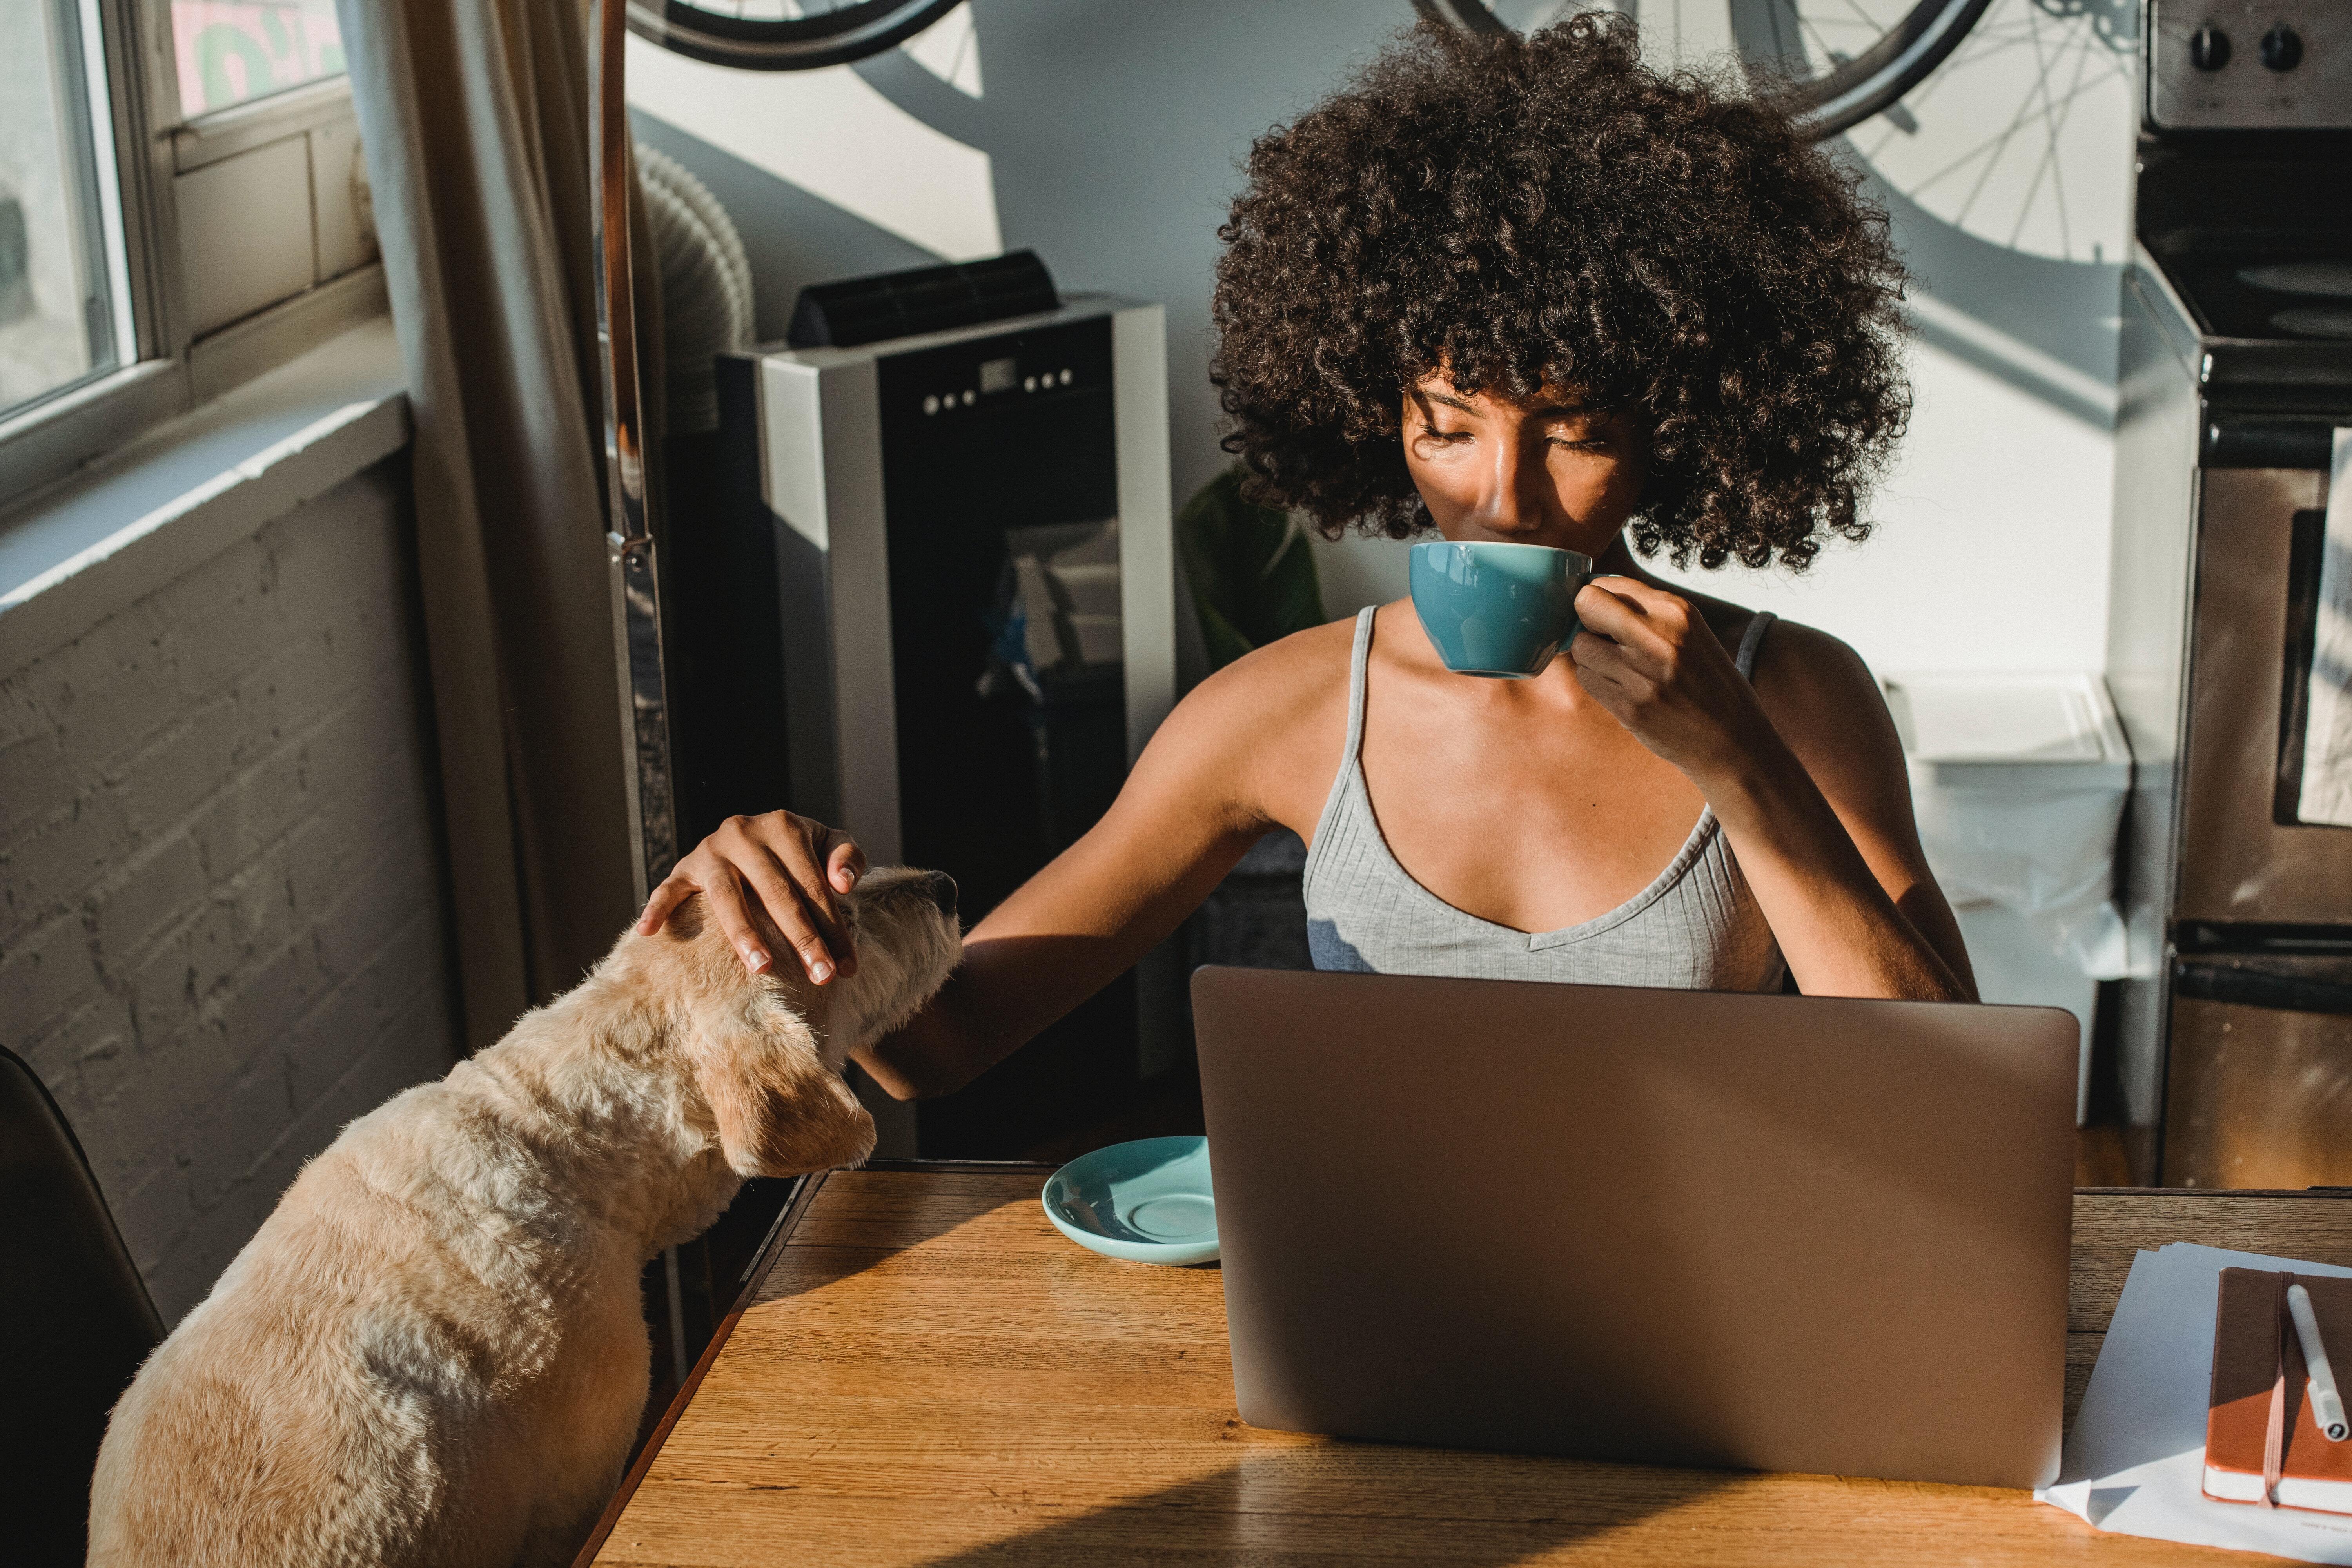 Customer retention: A woman sat at her desk, behind her laptop, drinking coffee in one hand and patting her dog that sits next to her in with the other.